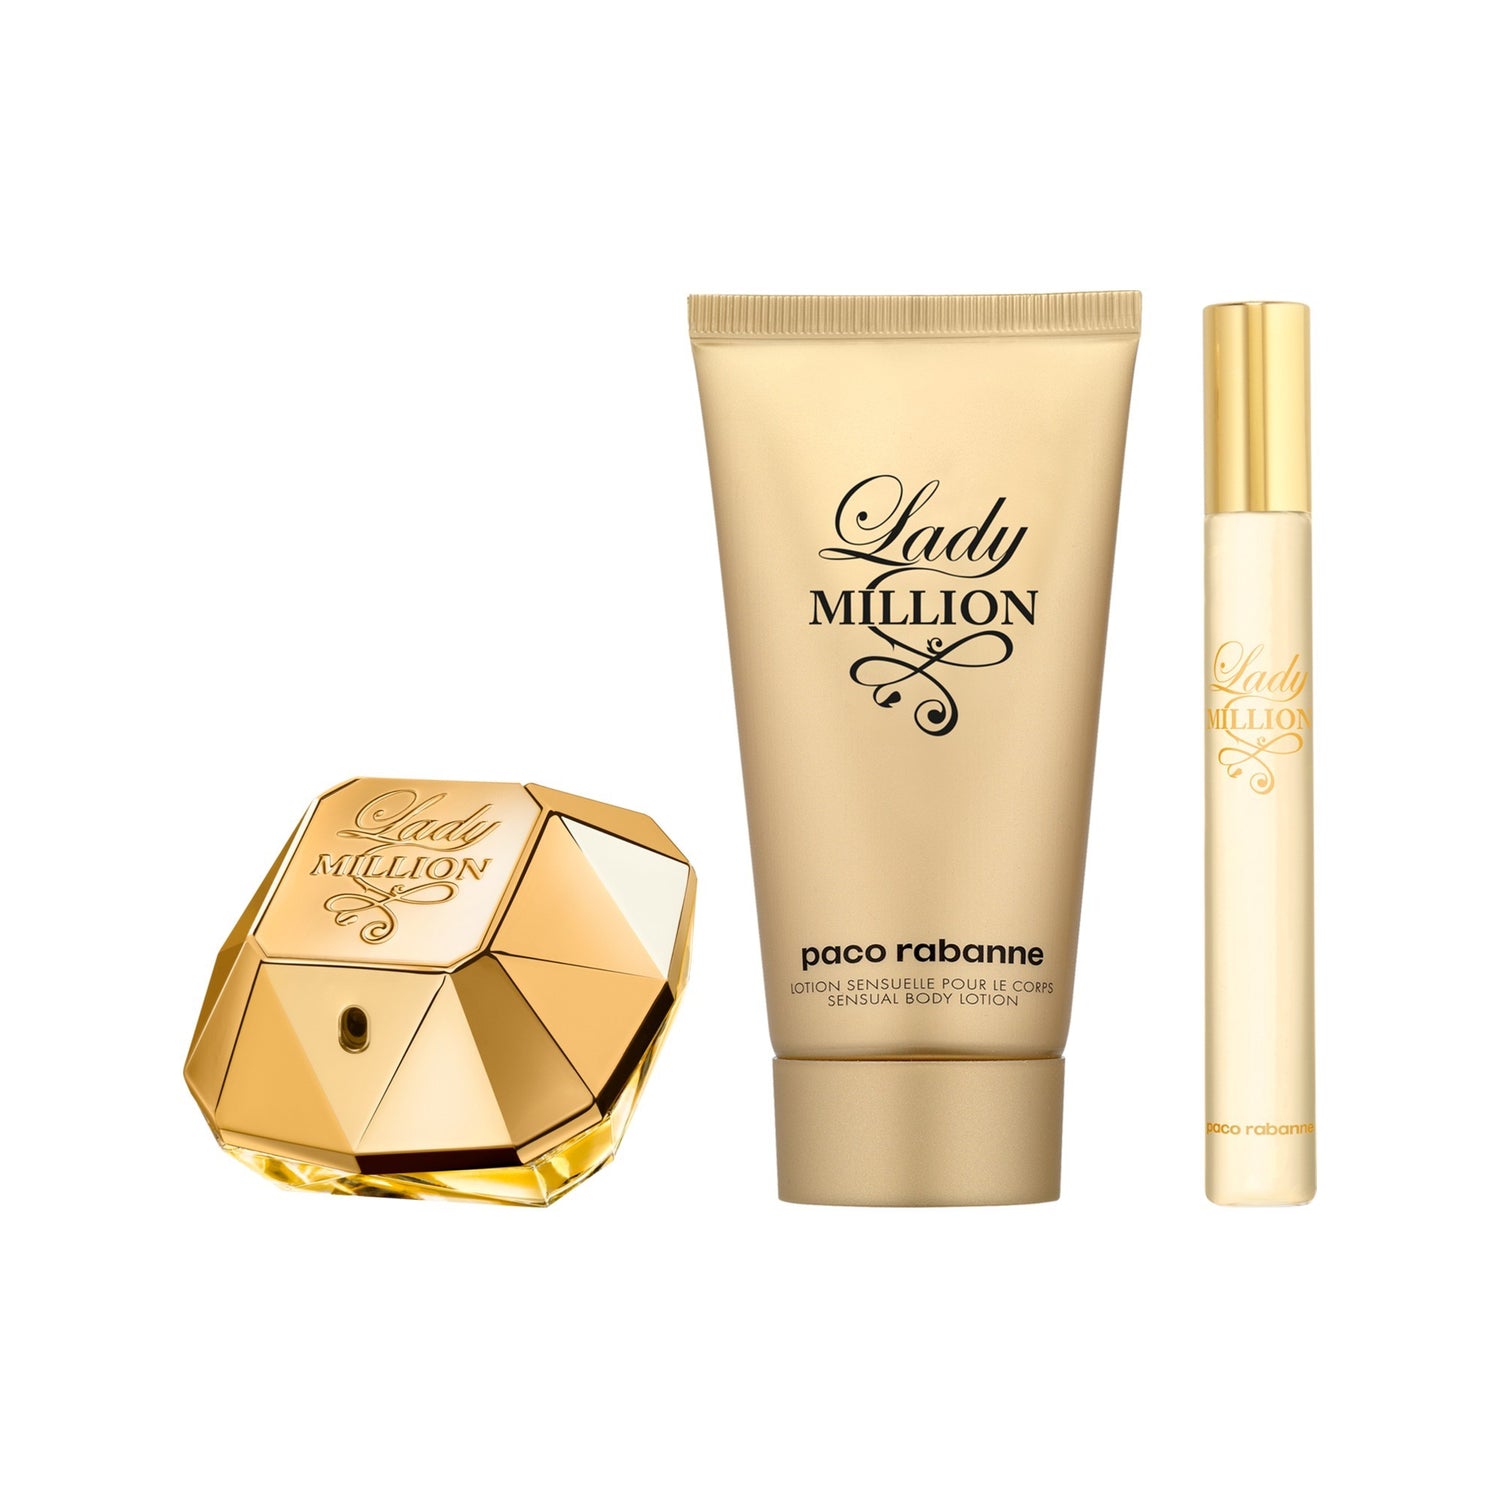 PACO RABANNE LADY MILLION EDP 50ML 3 PIECE SET XMAS 2023 just products on their own without box